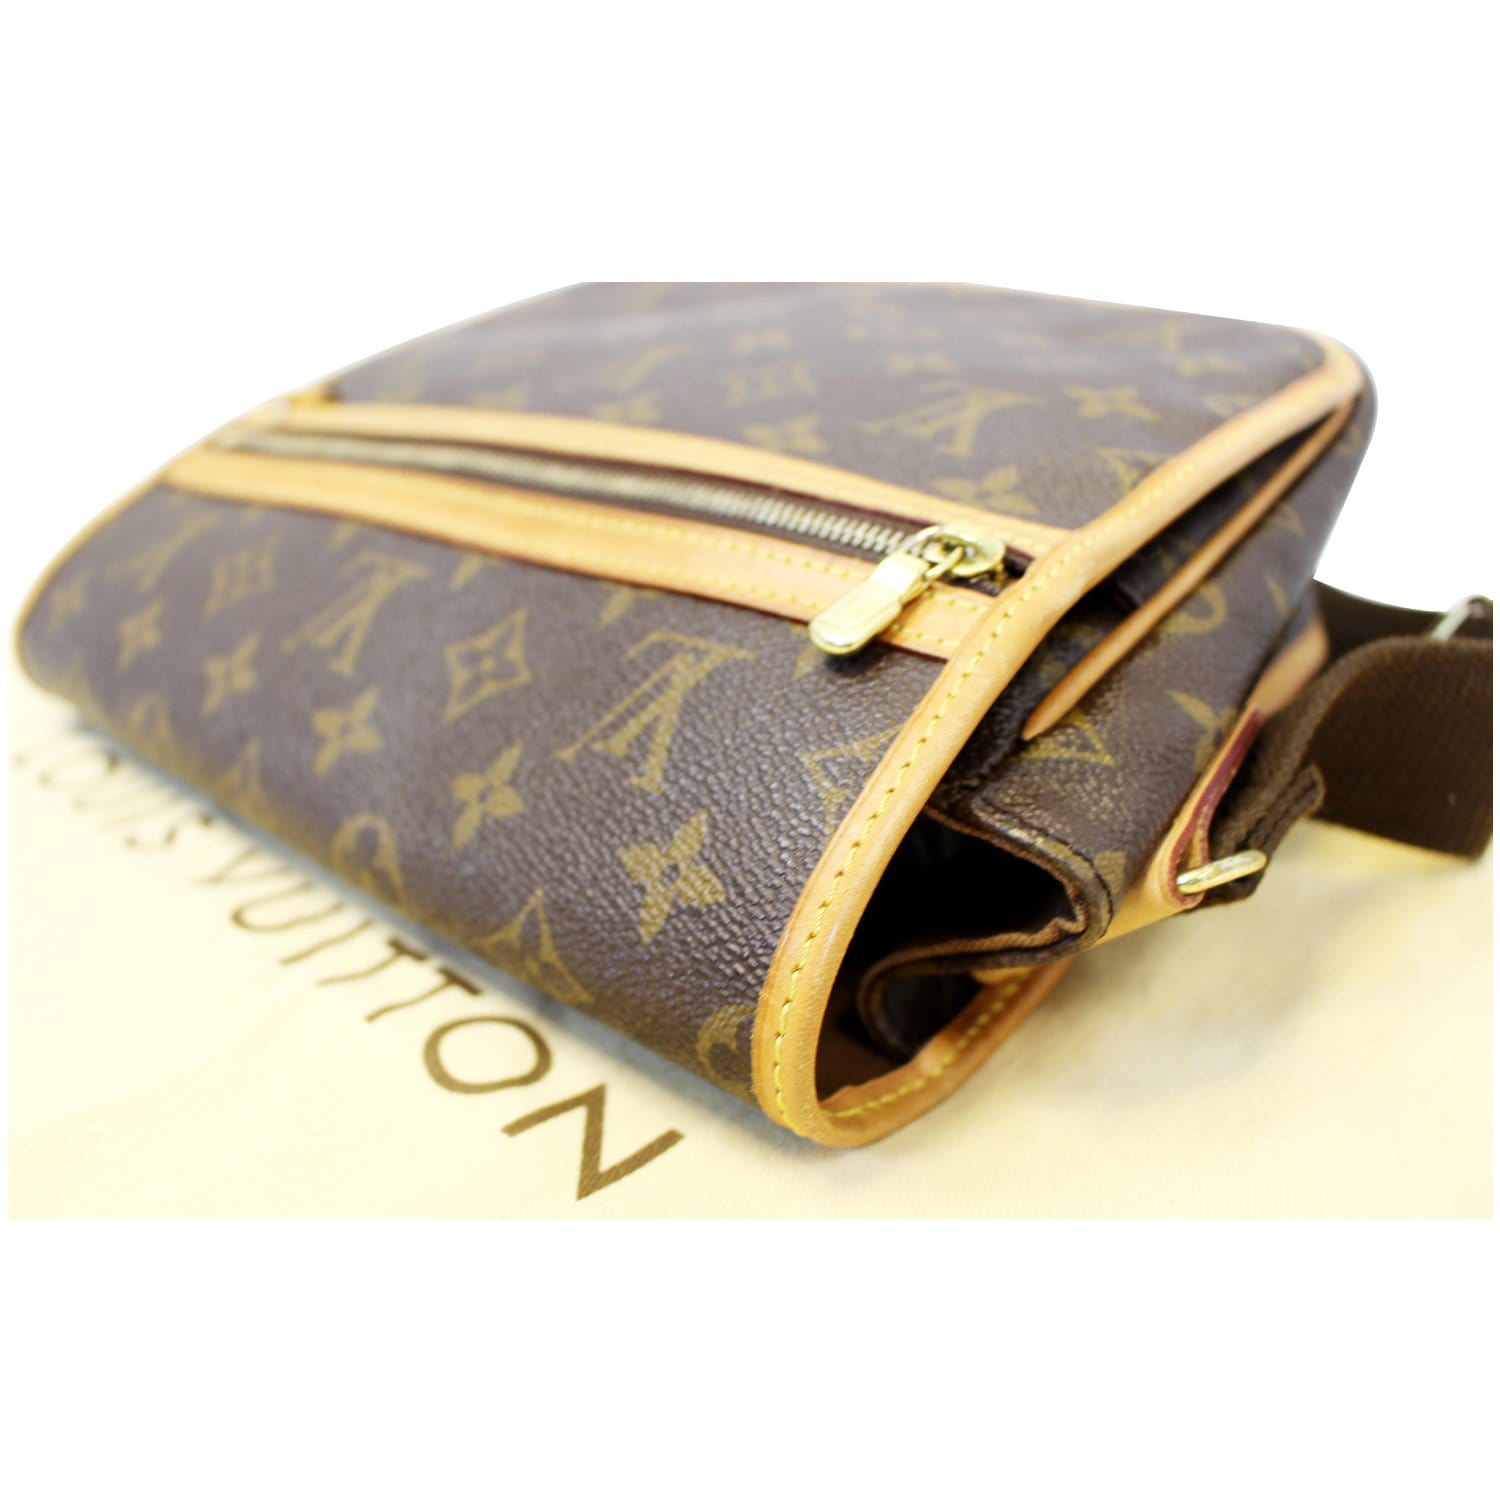 Super casual and perfect for all seasons. The Louis Vuitton Bosphore.